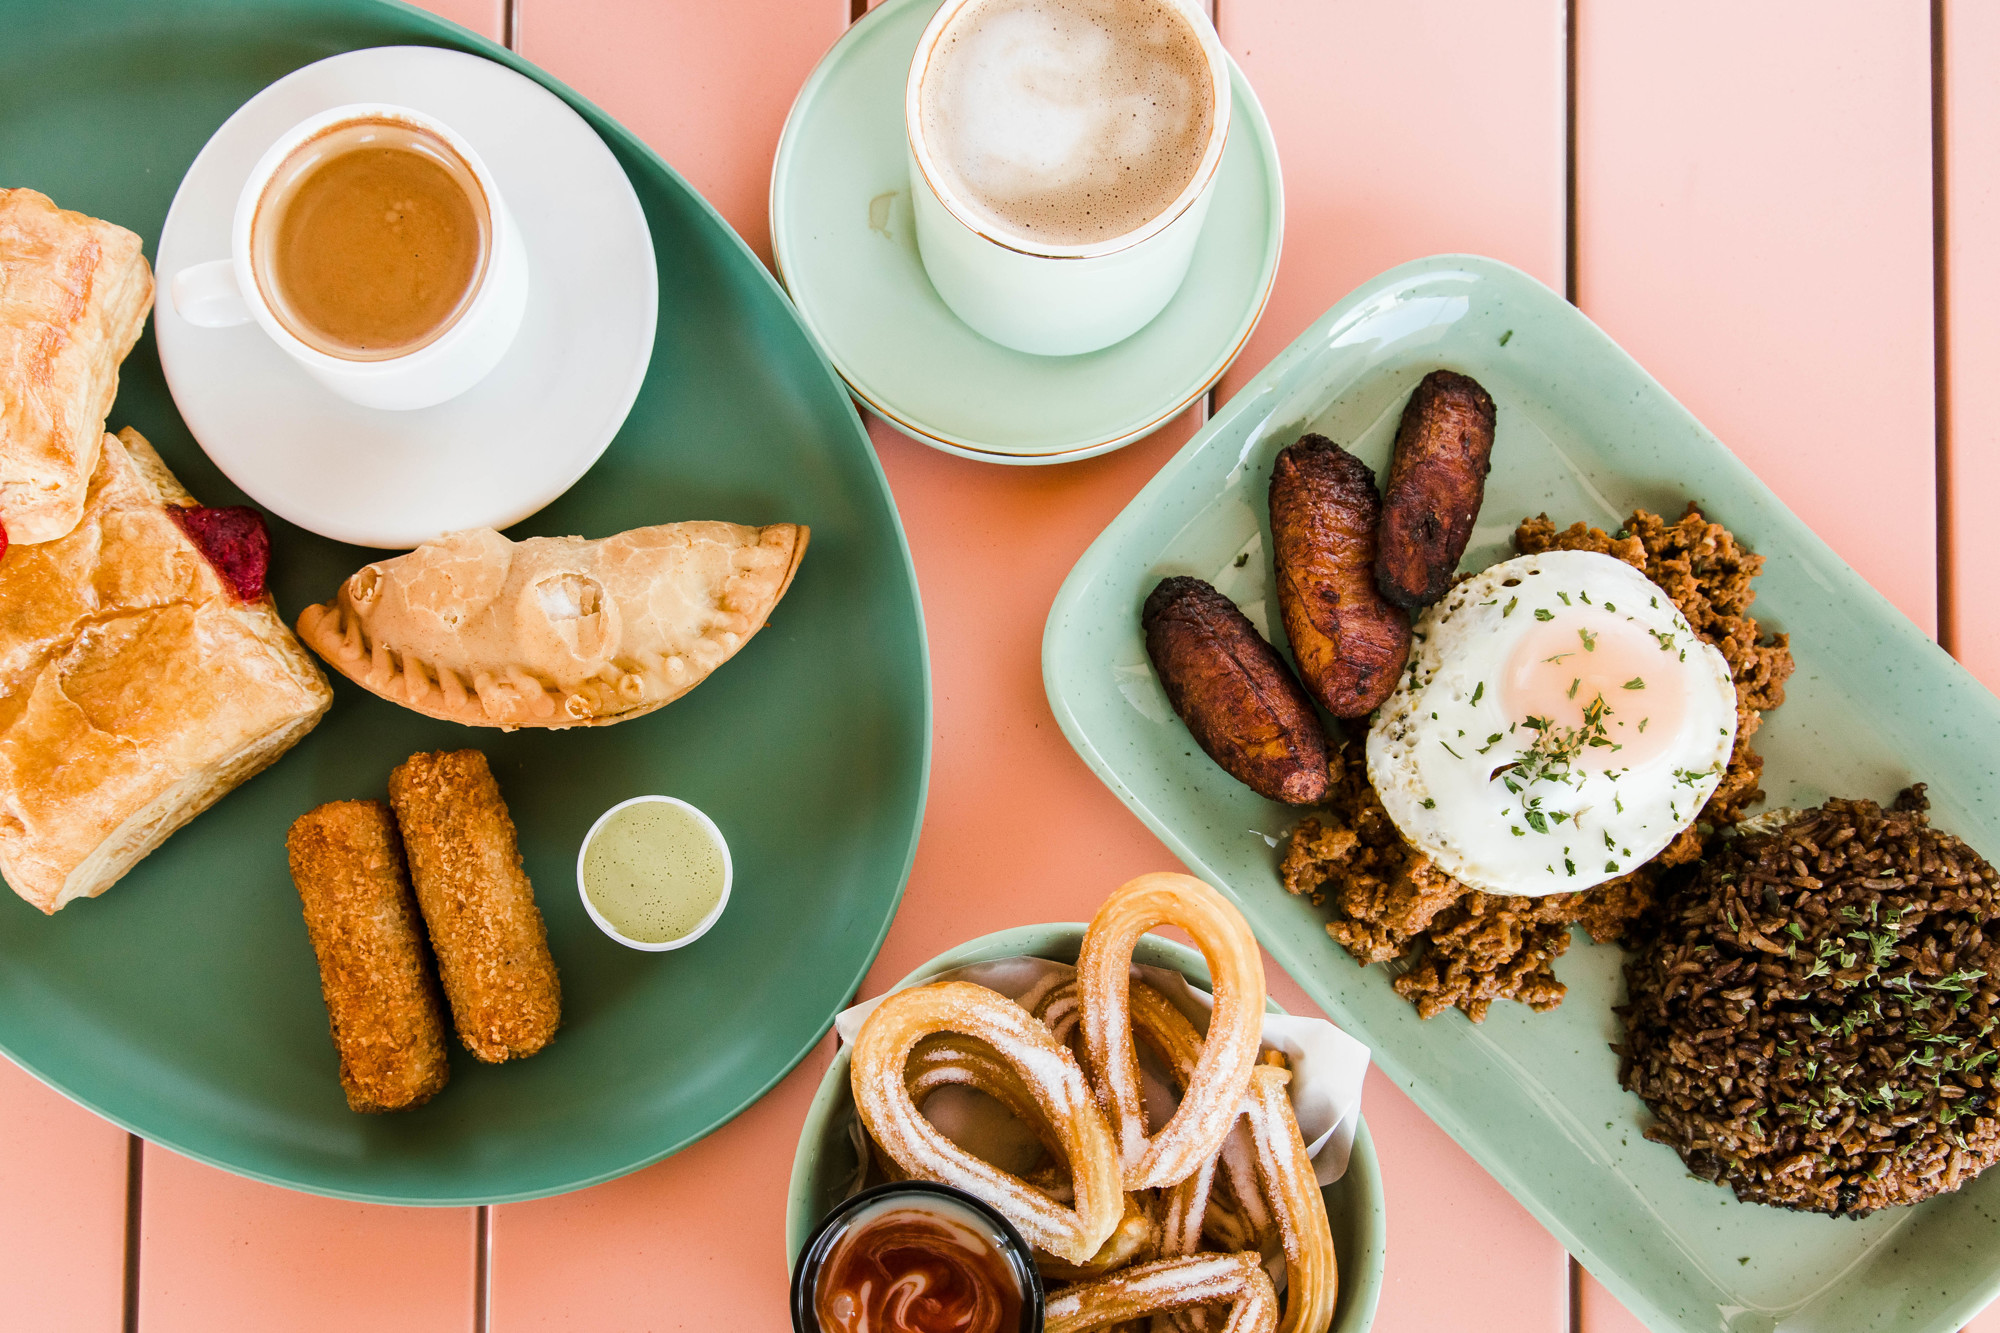 1928 Cuban Bistro’s menu includes breakfast all day, lunch and dinner.